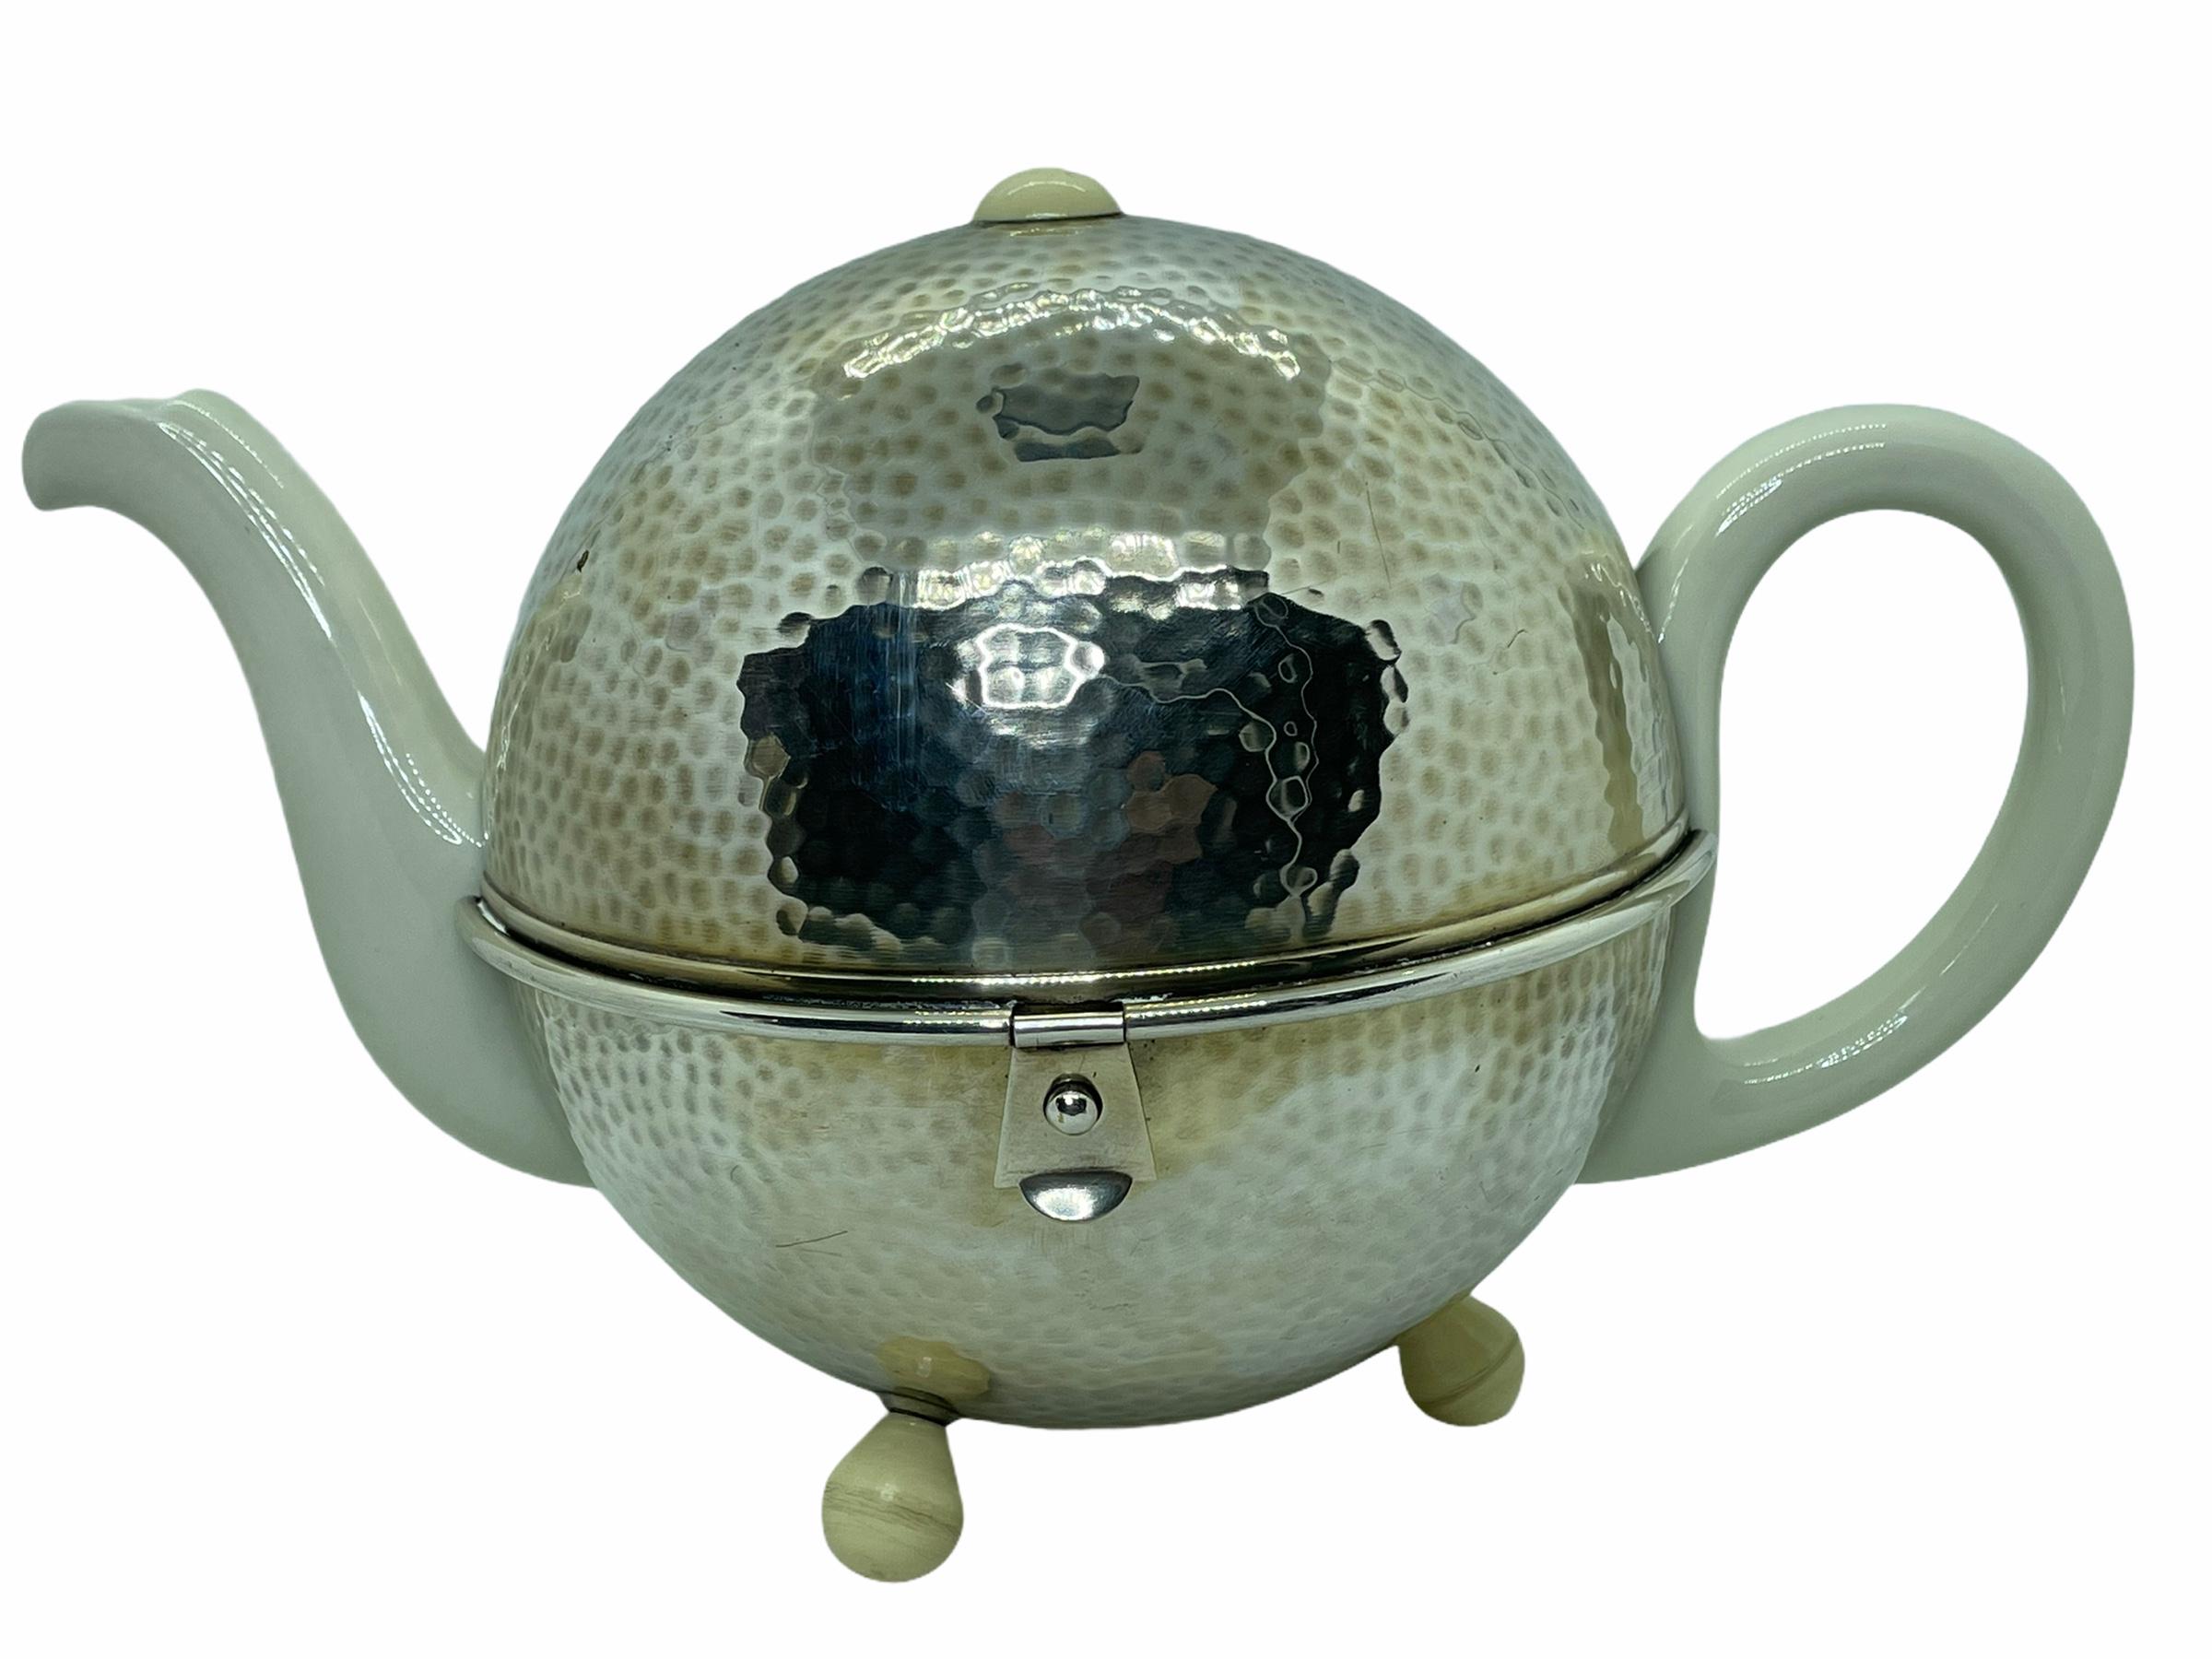 Art Deco Bauhaus Hutschenreuther tea pot hammered WMF metal cozy This handsome vintage tea pot marked Hutschenreuther Bavaria Germany is snugly nestled in a WMF D.R.P. hammered silver-clad over copper cozy, and lined with a charcoal grey wool felt.